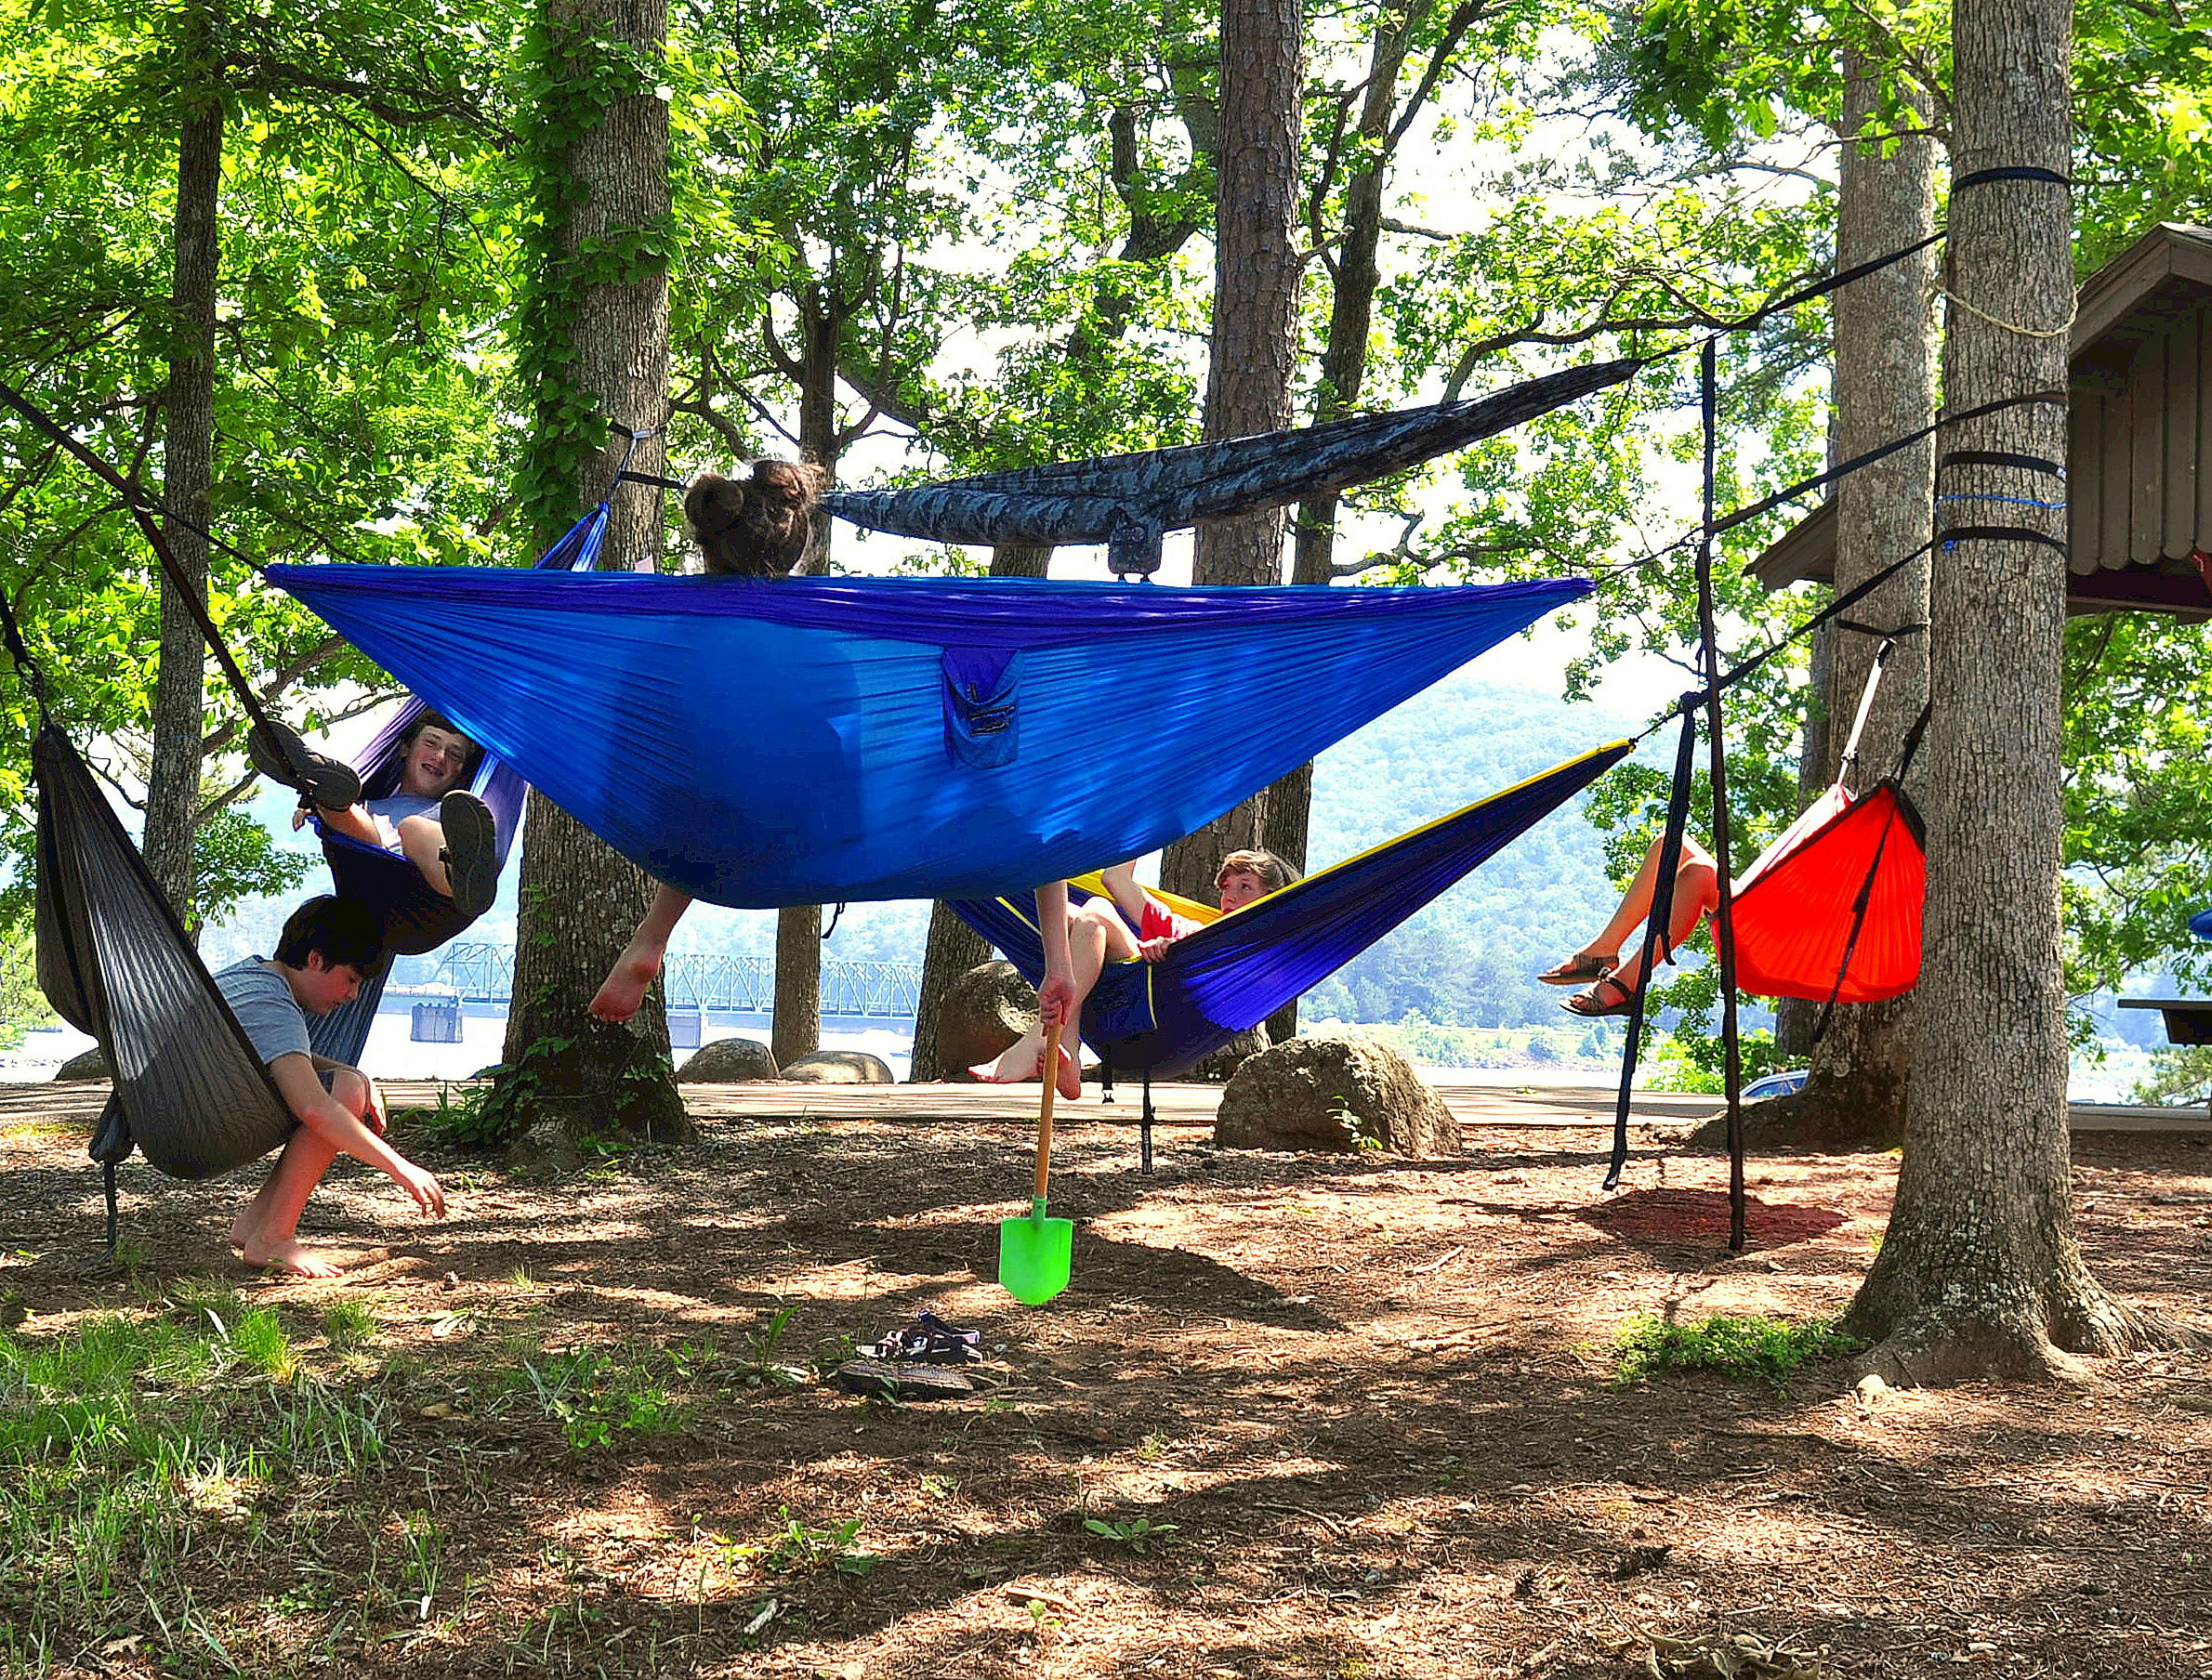 People sitting in and standing around some camping hammocks strung up between trees near a lake.